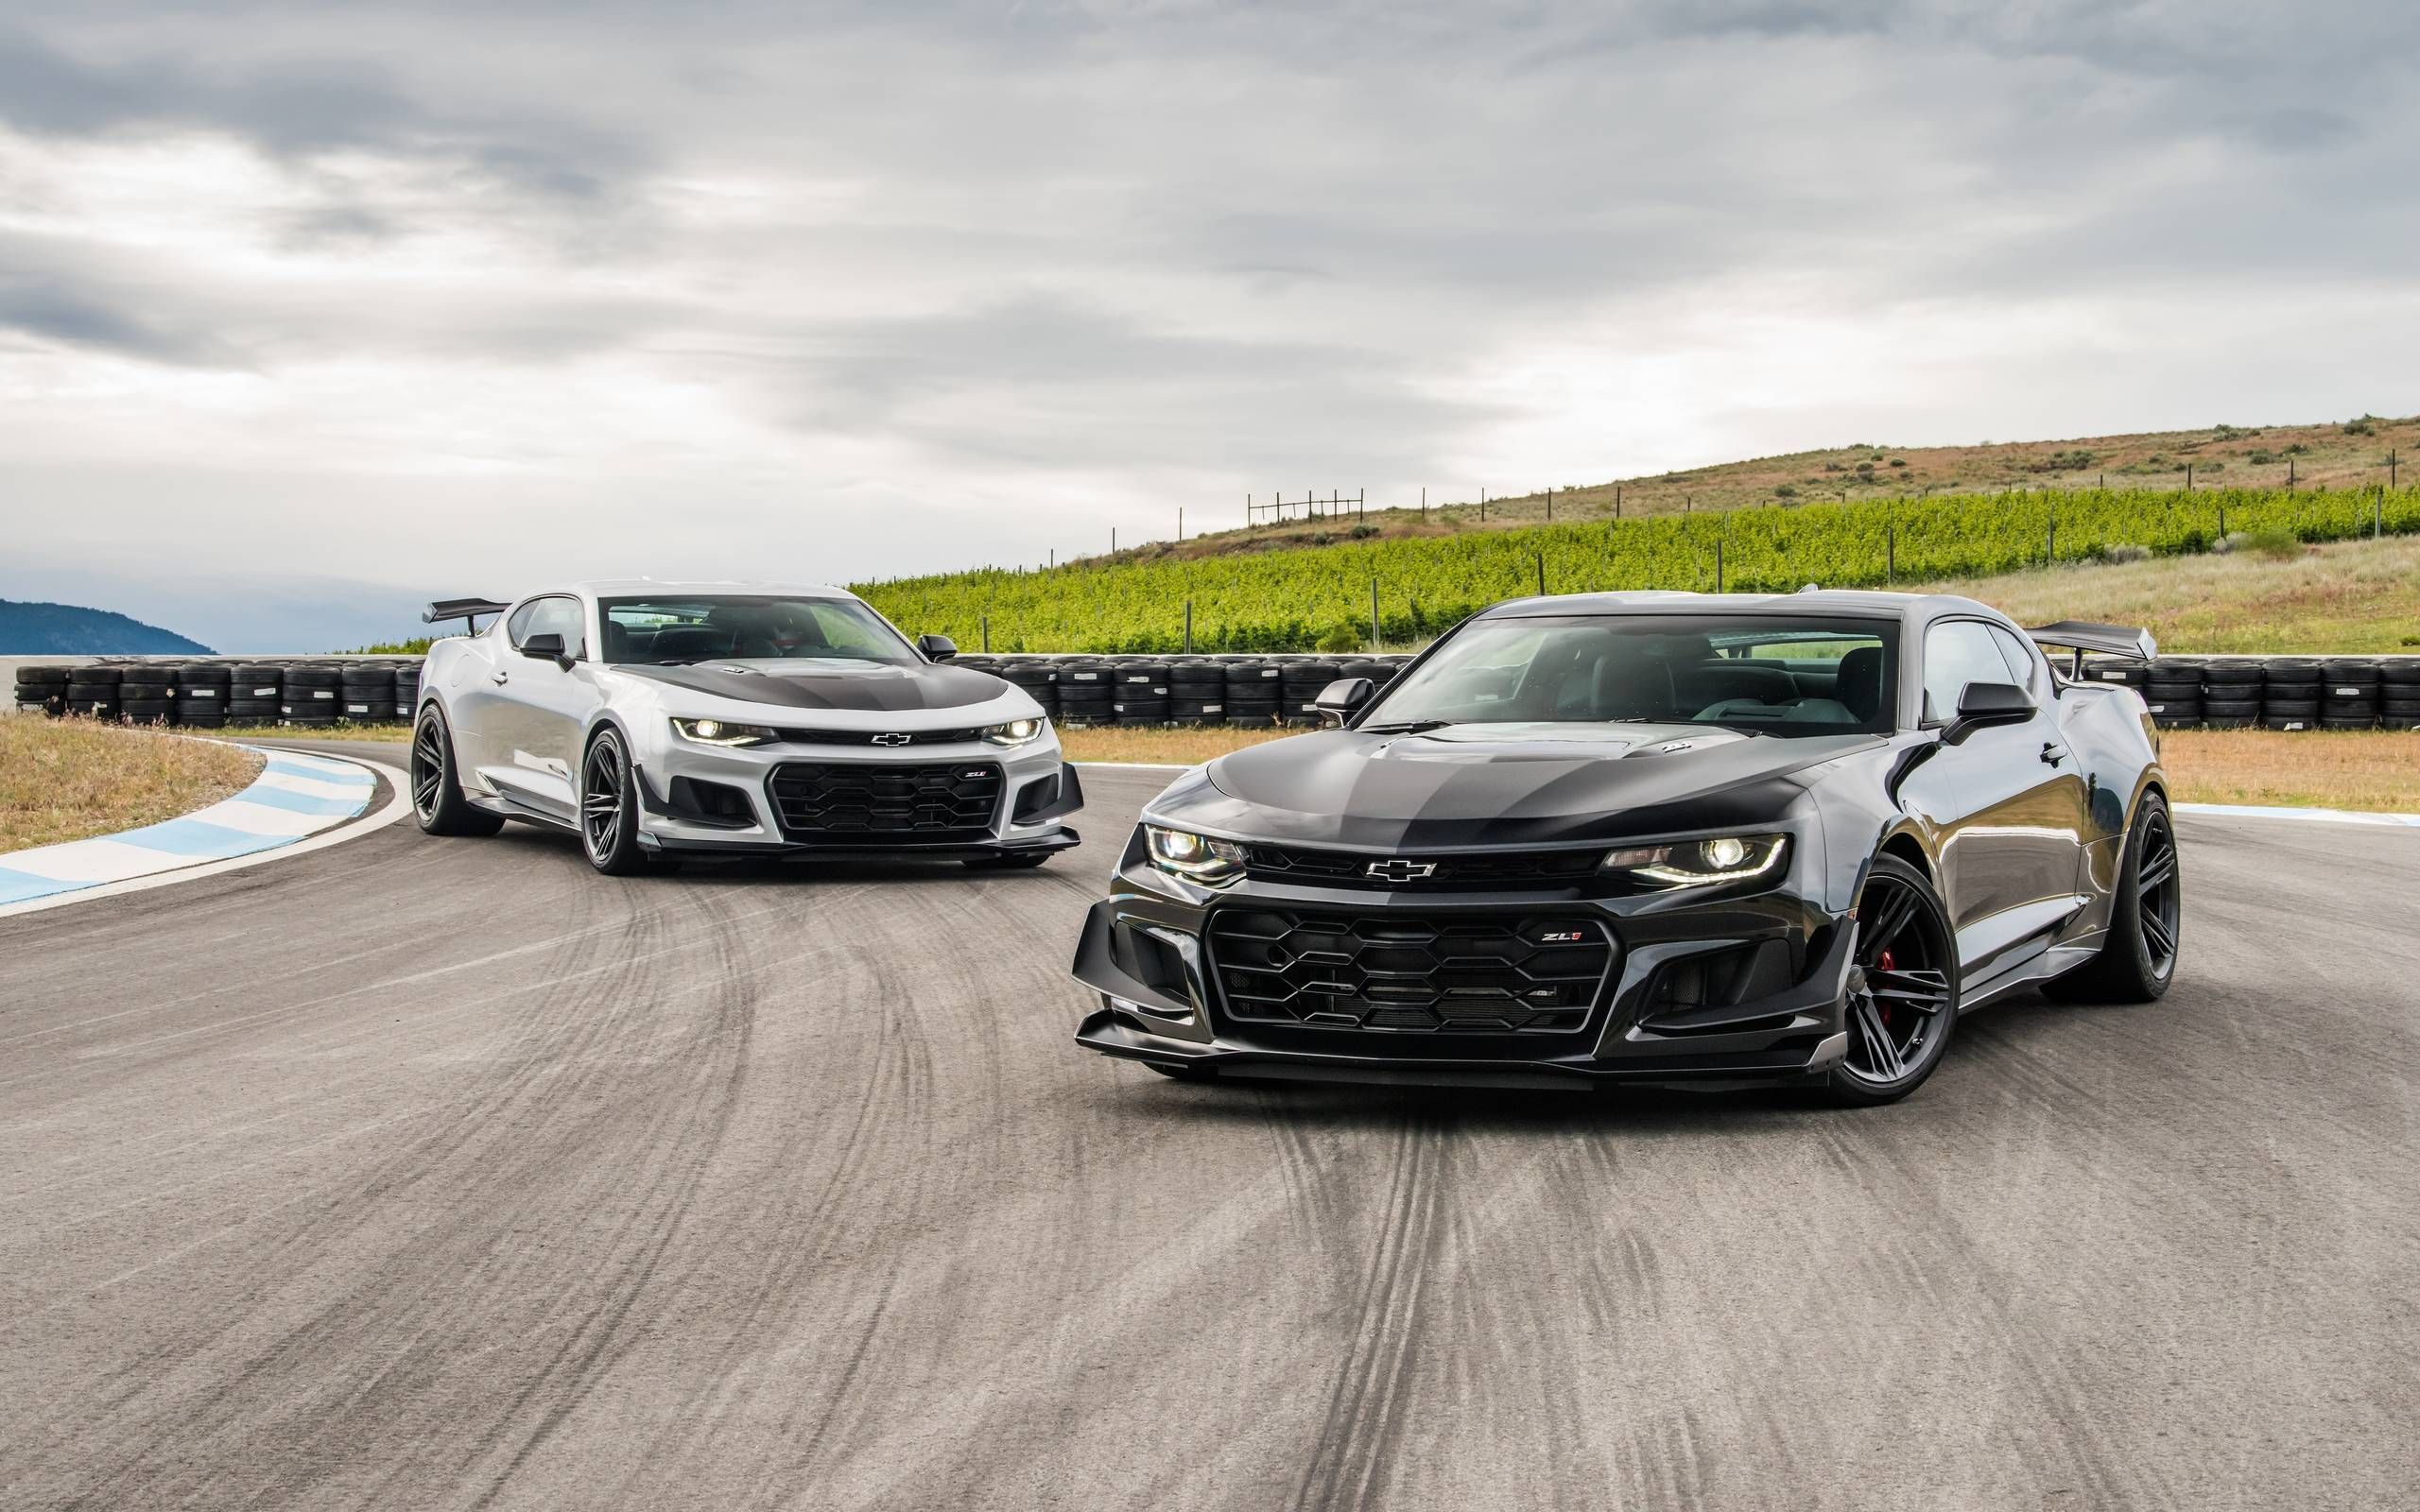 Camaro ZL1 1LE First Drive: The Ultimate Track Ready Camaro